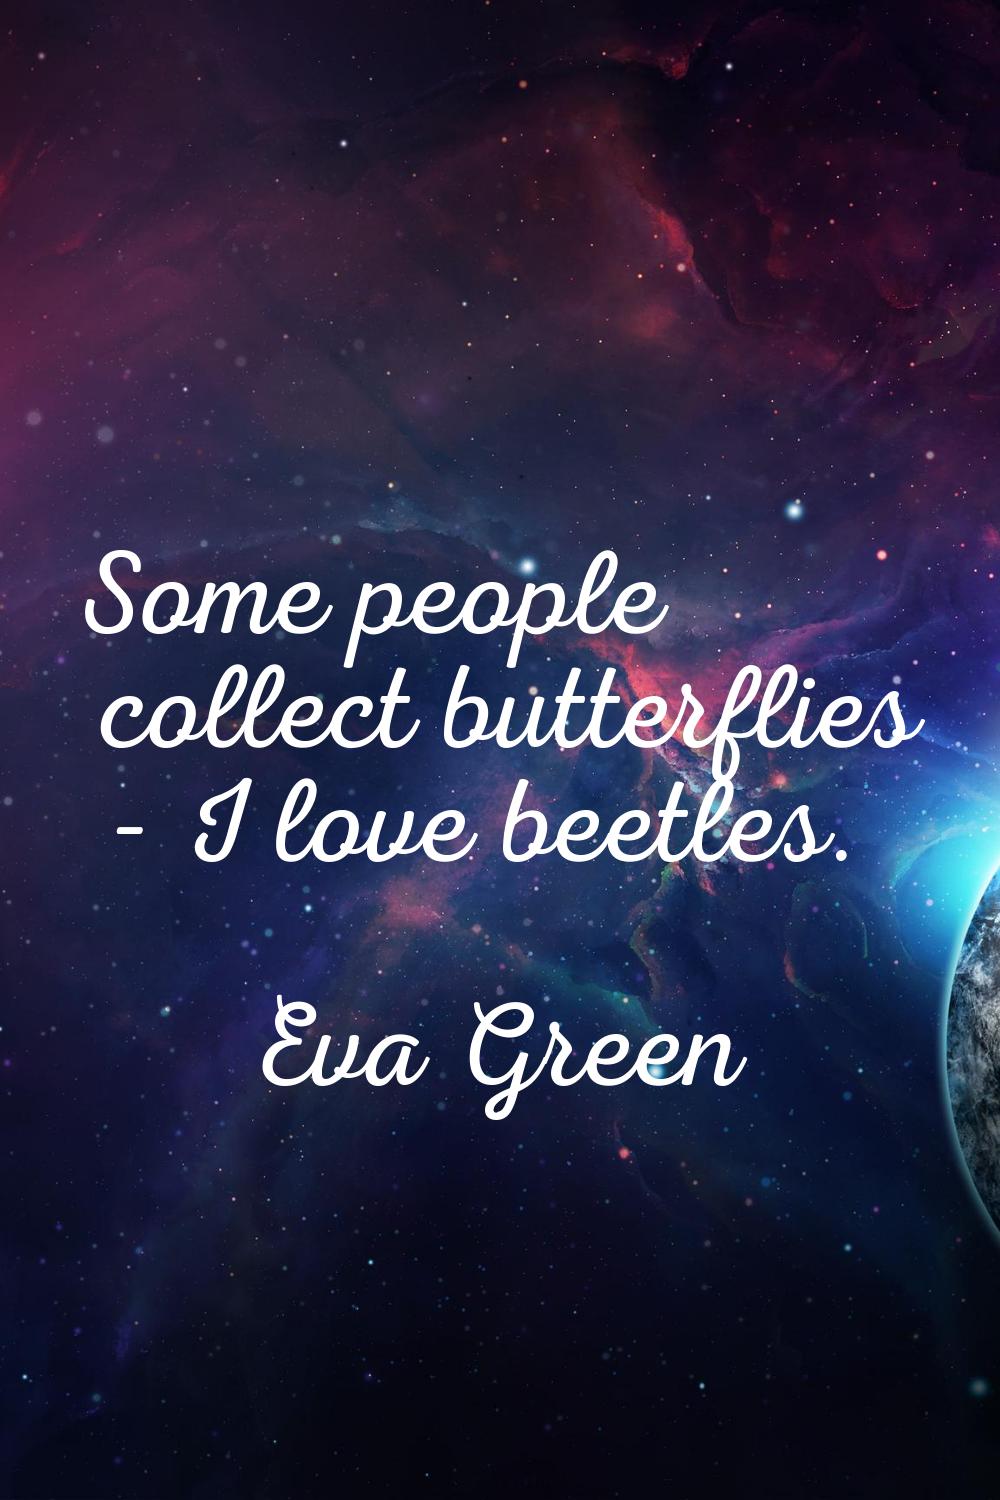 Some people collect butterflies - I love beetles.